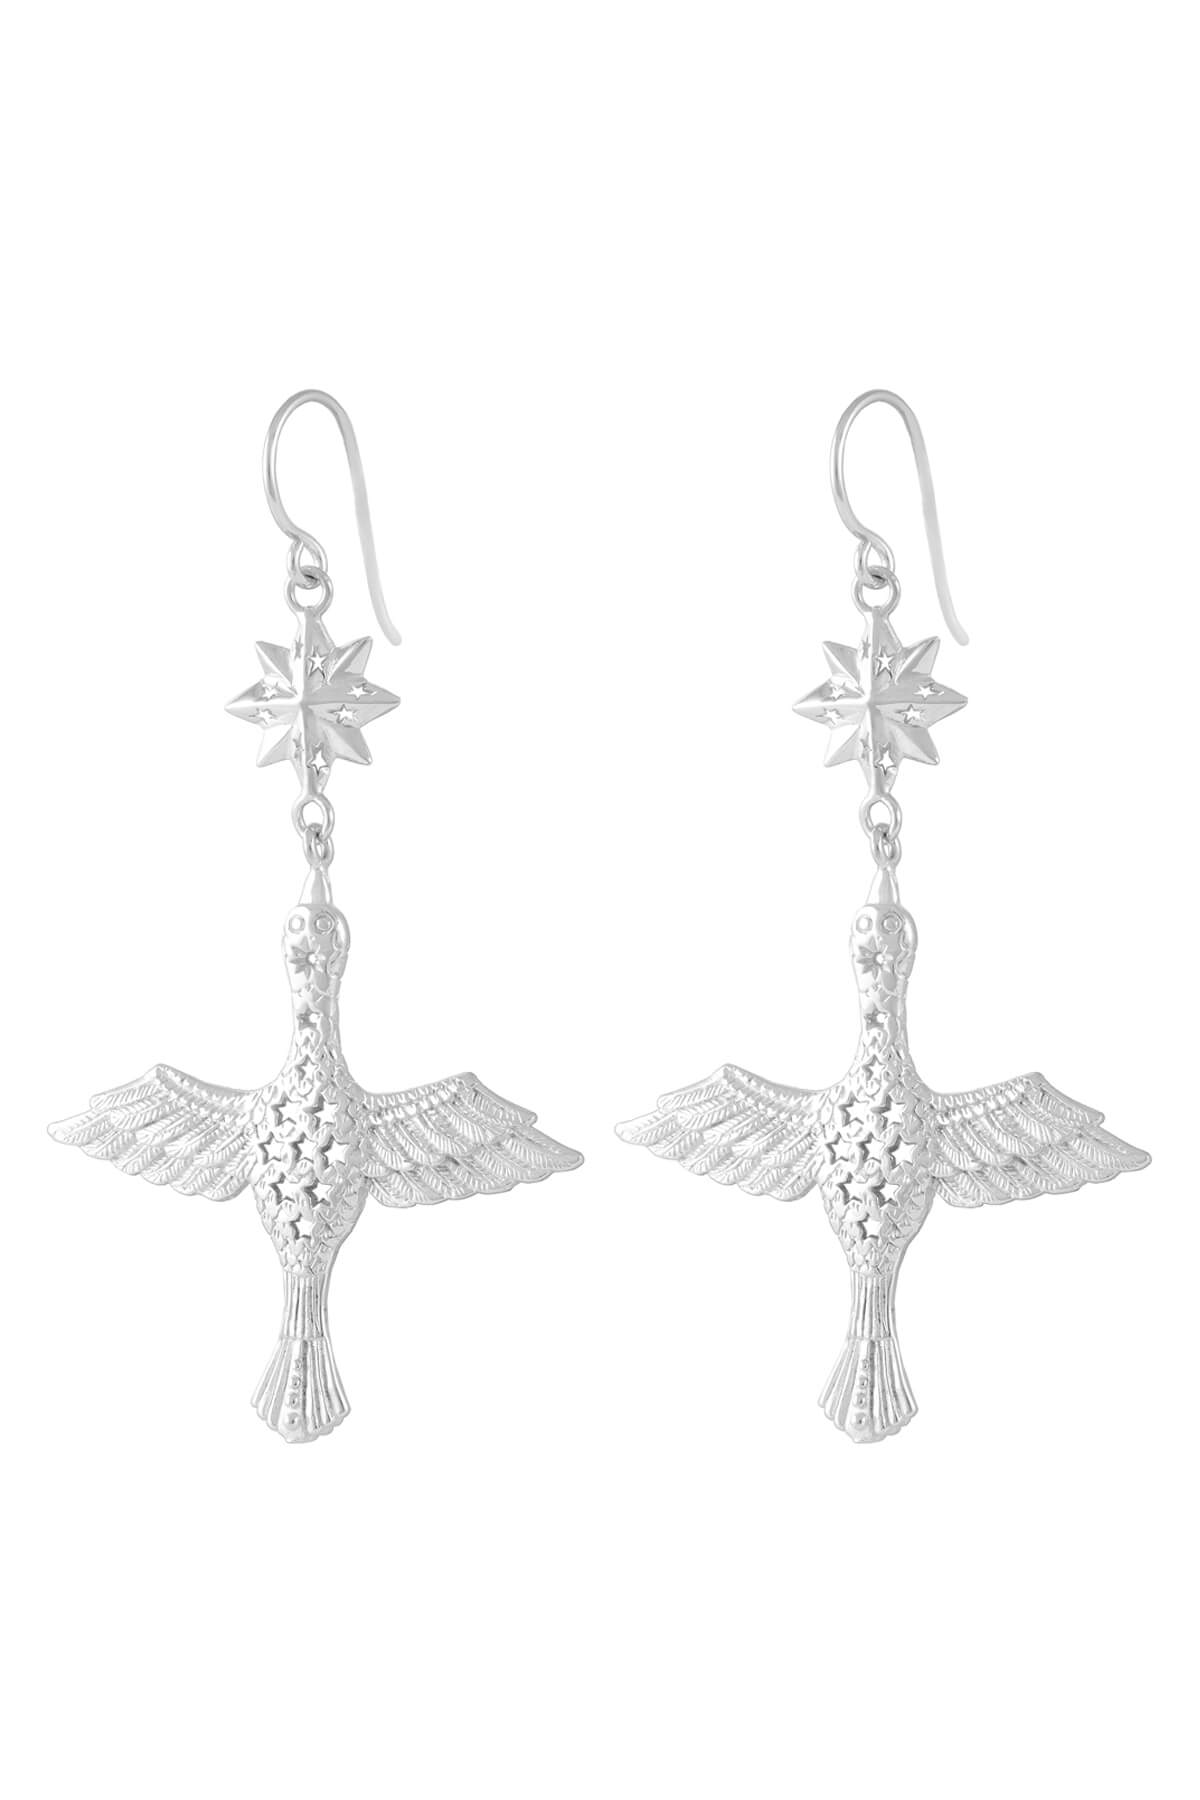 Fairy bird and 8-pointed star earrings. Silver